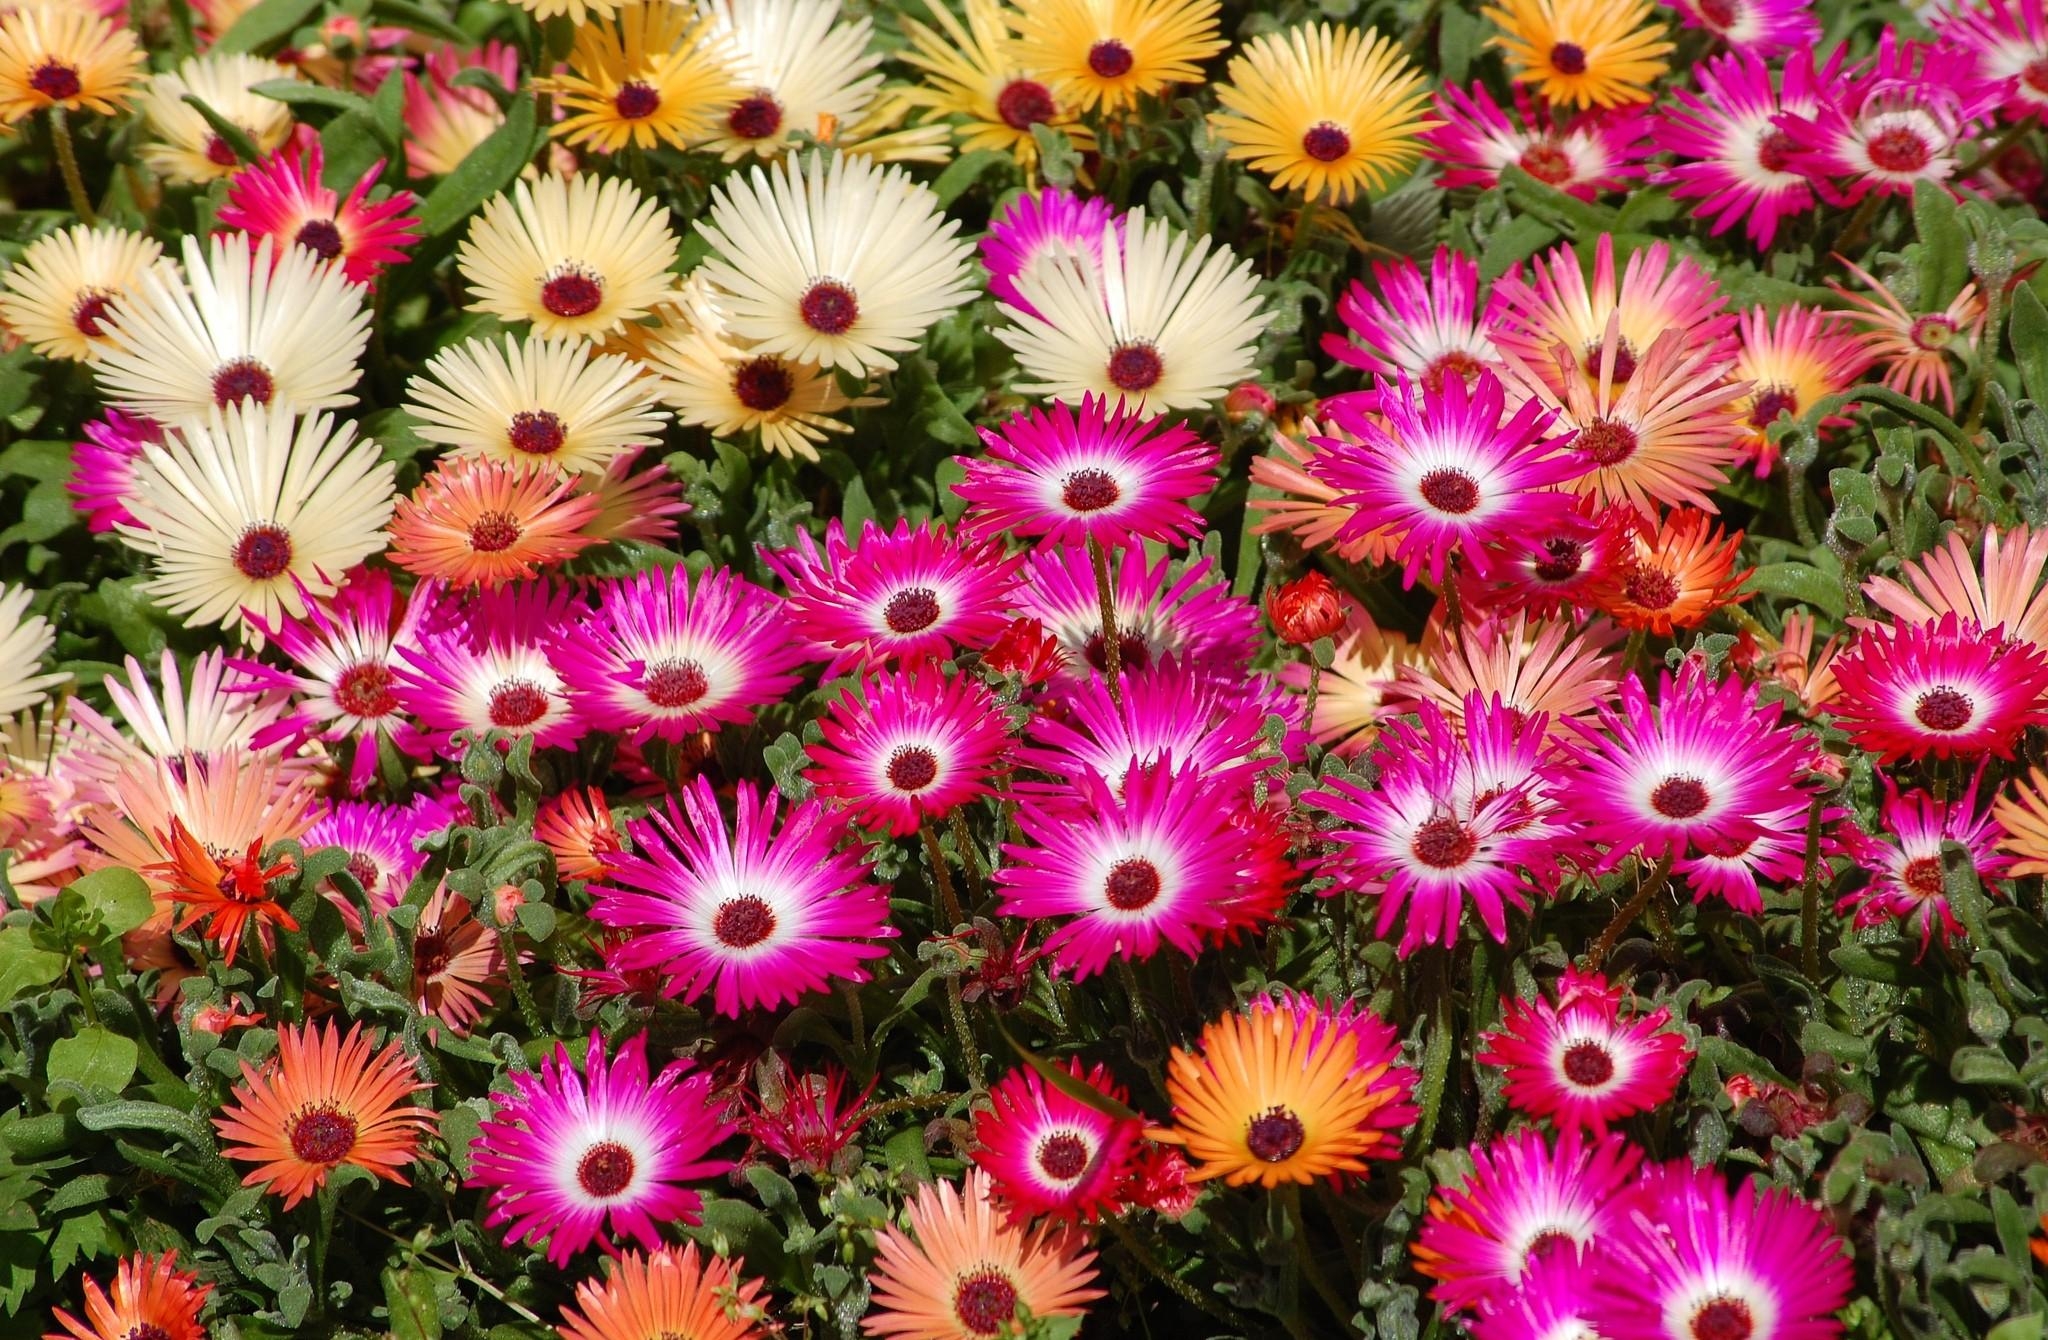 Flowerbed bright, flower bed, colorful, aptenias Free Stock Photos